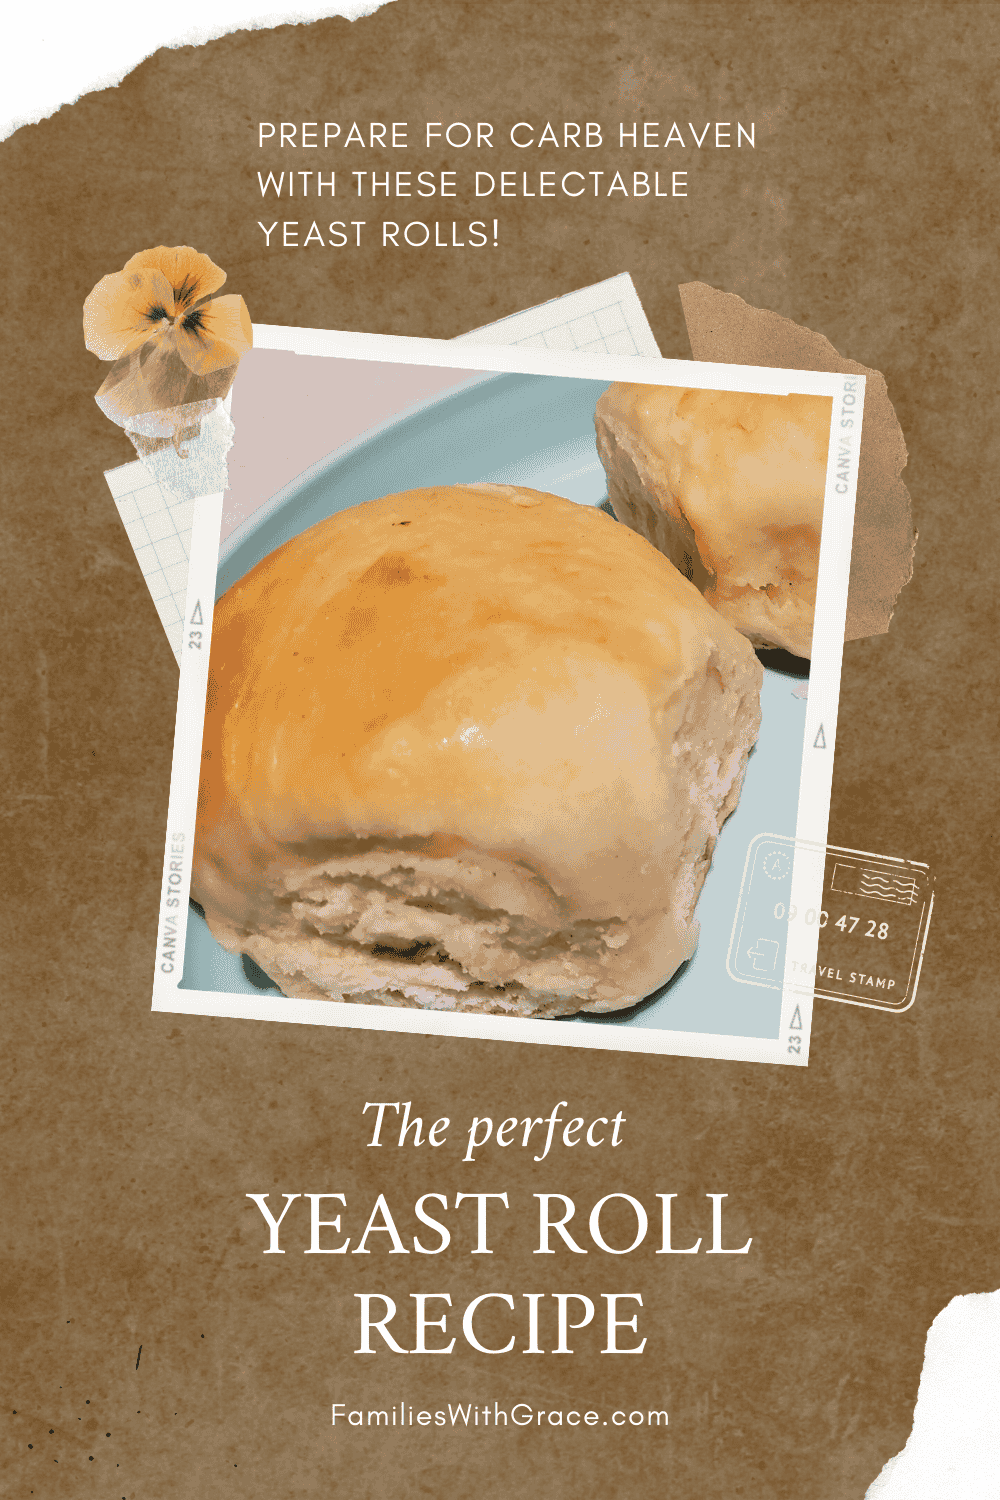 The perfect yeast roll recipe